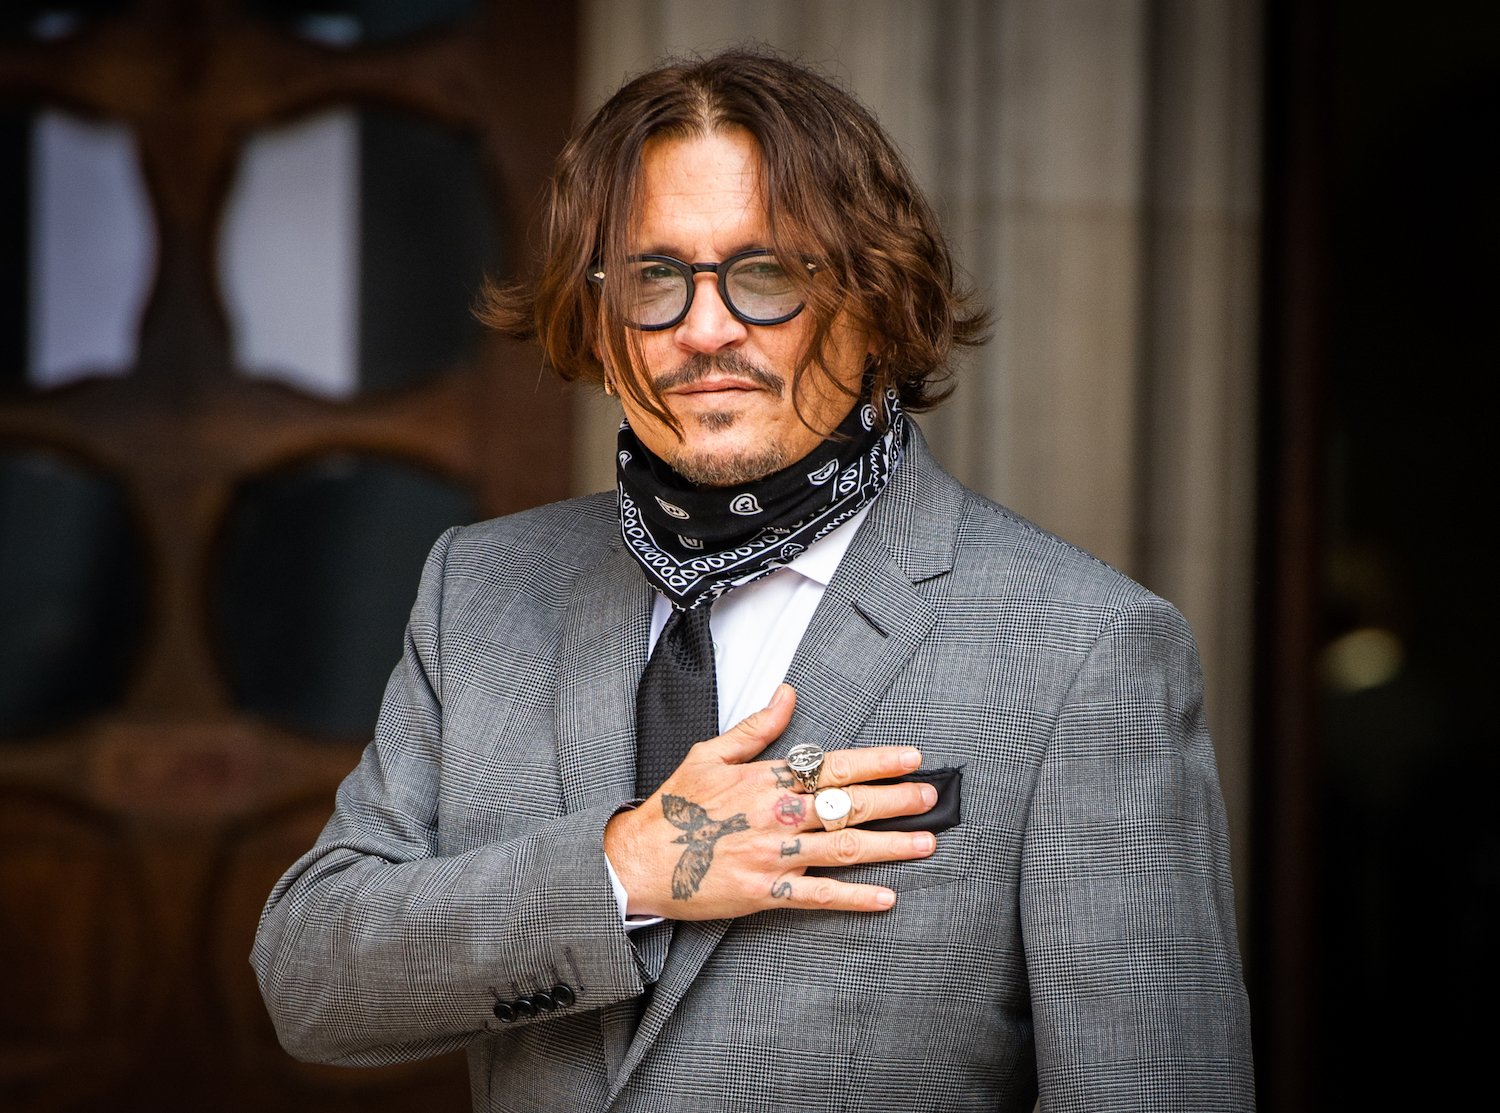 Johnny Depp's Net Worth Was Positively Affected by the Defamation Trial